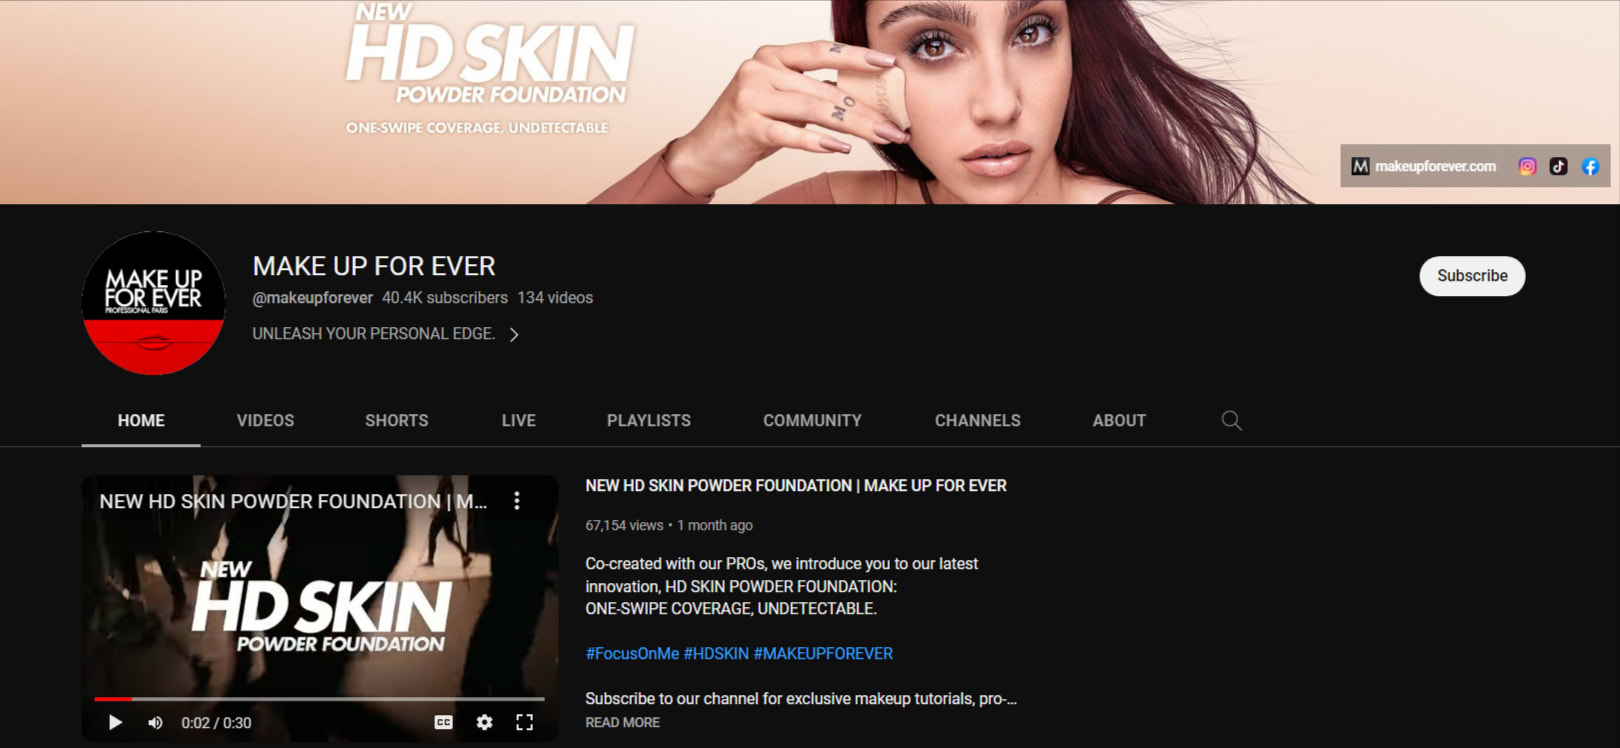 Make Up For Ever’s YouTube channel